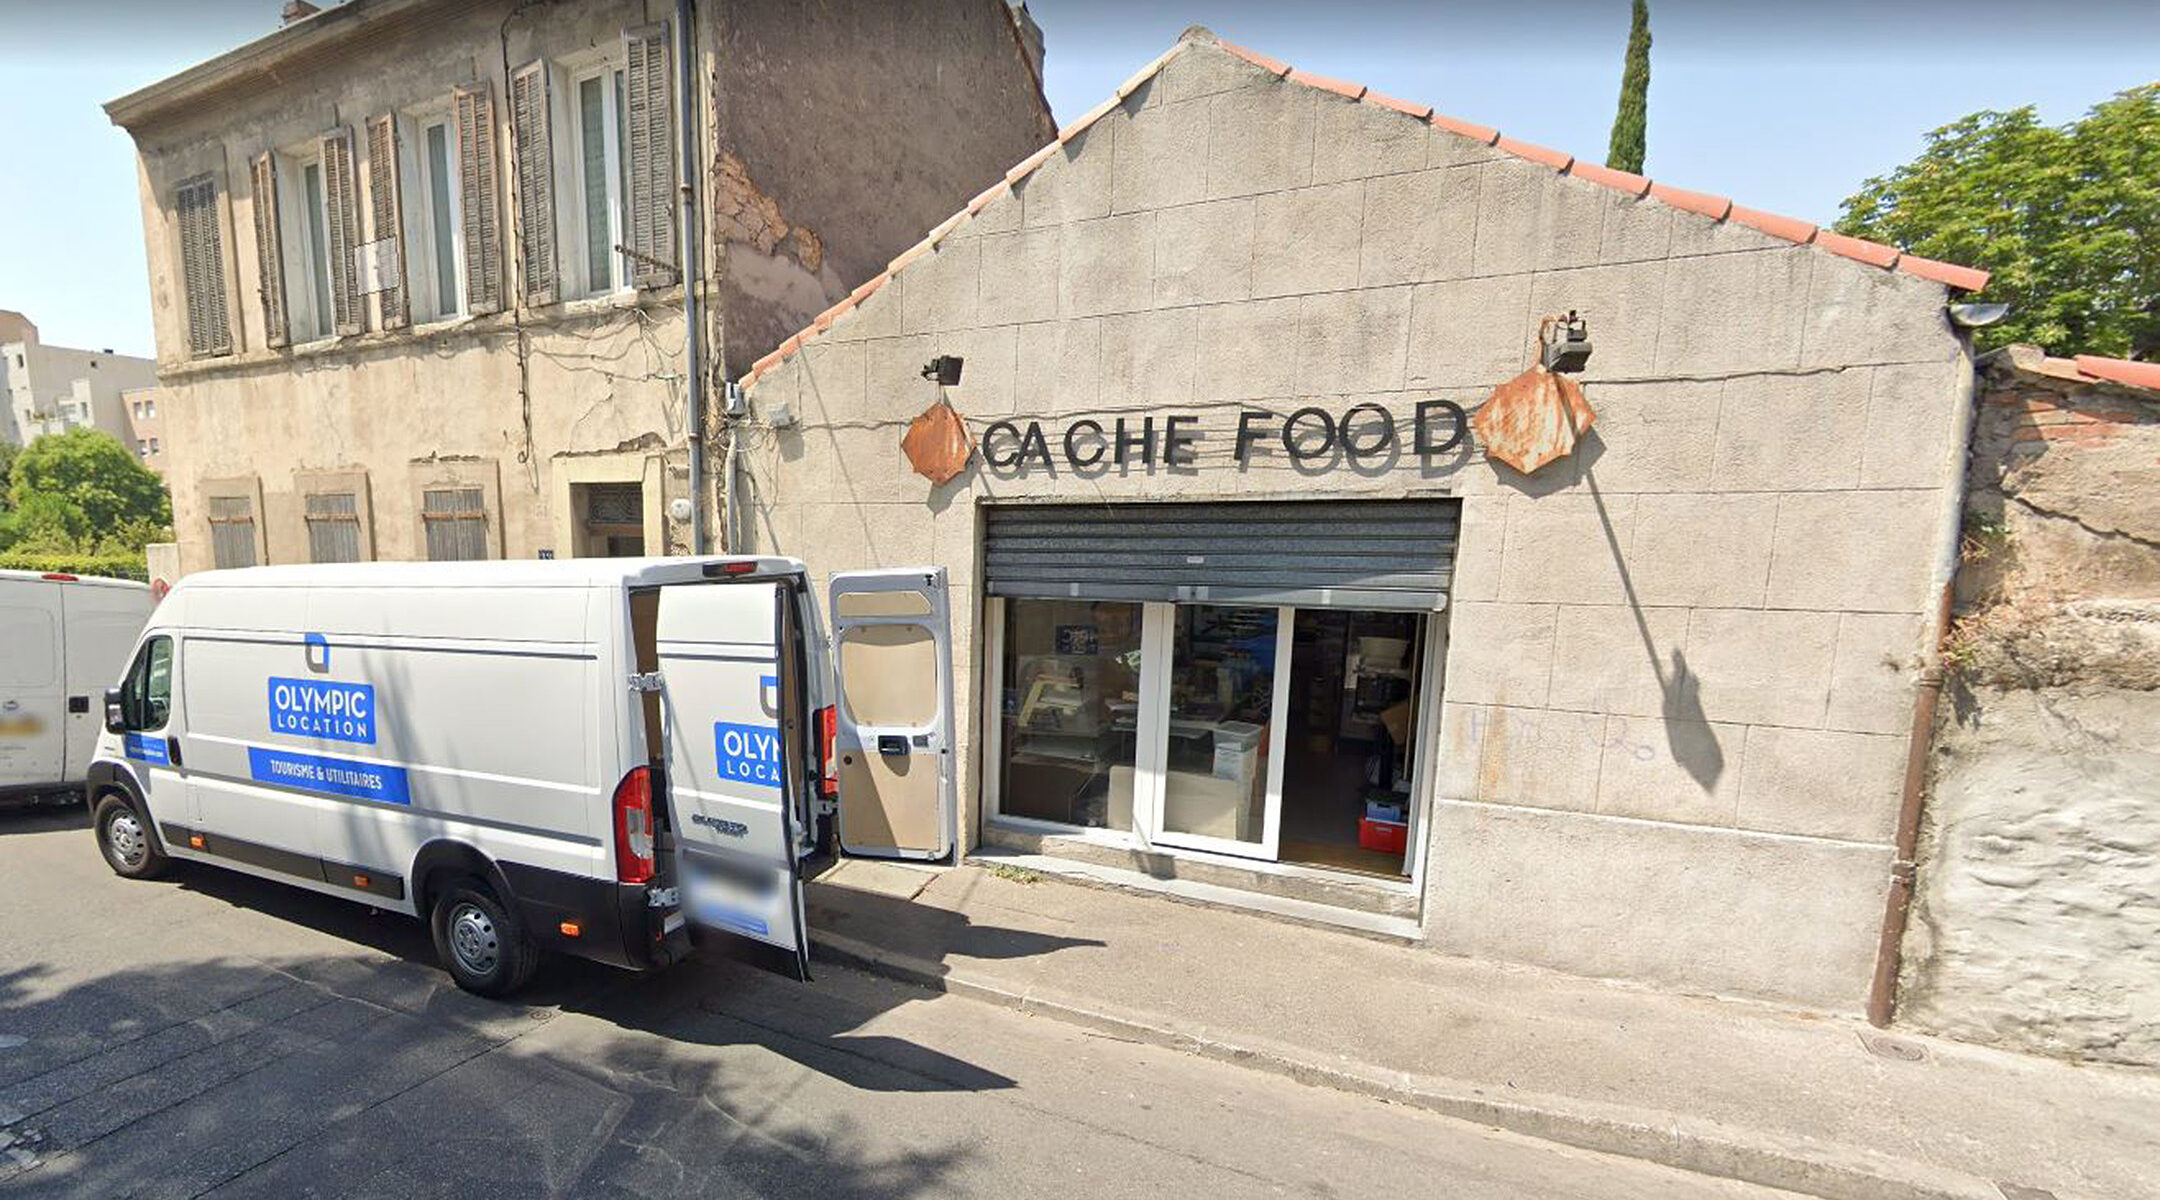 The entrance to the Cache Food kosher eatery and bakery in MArseille, France. (Google Maps)